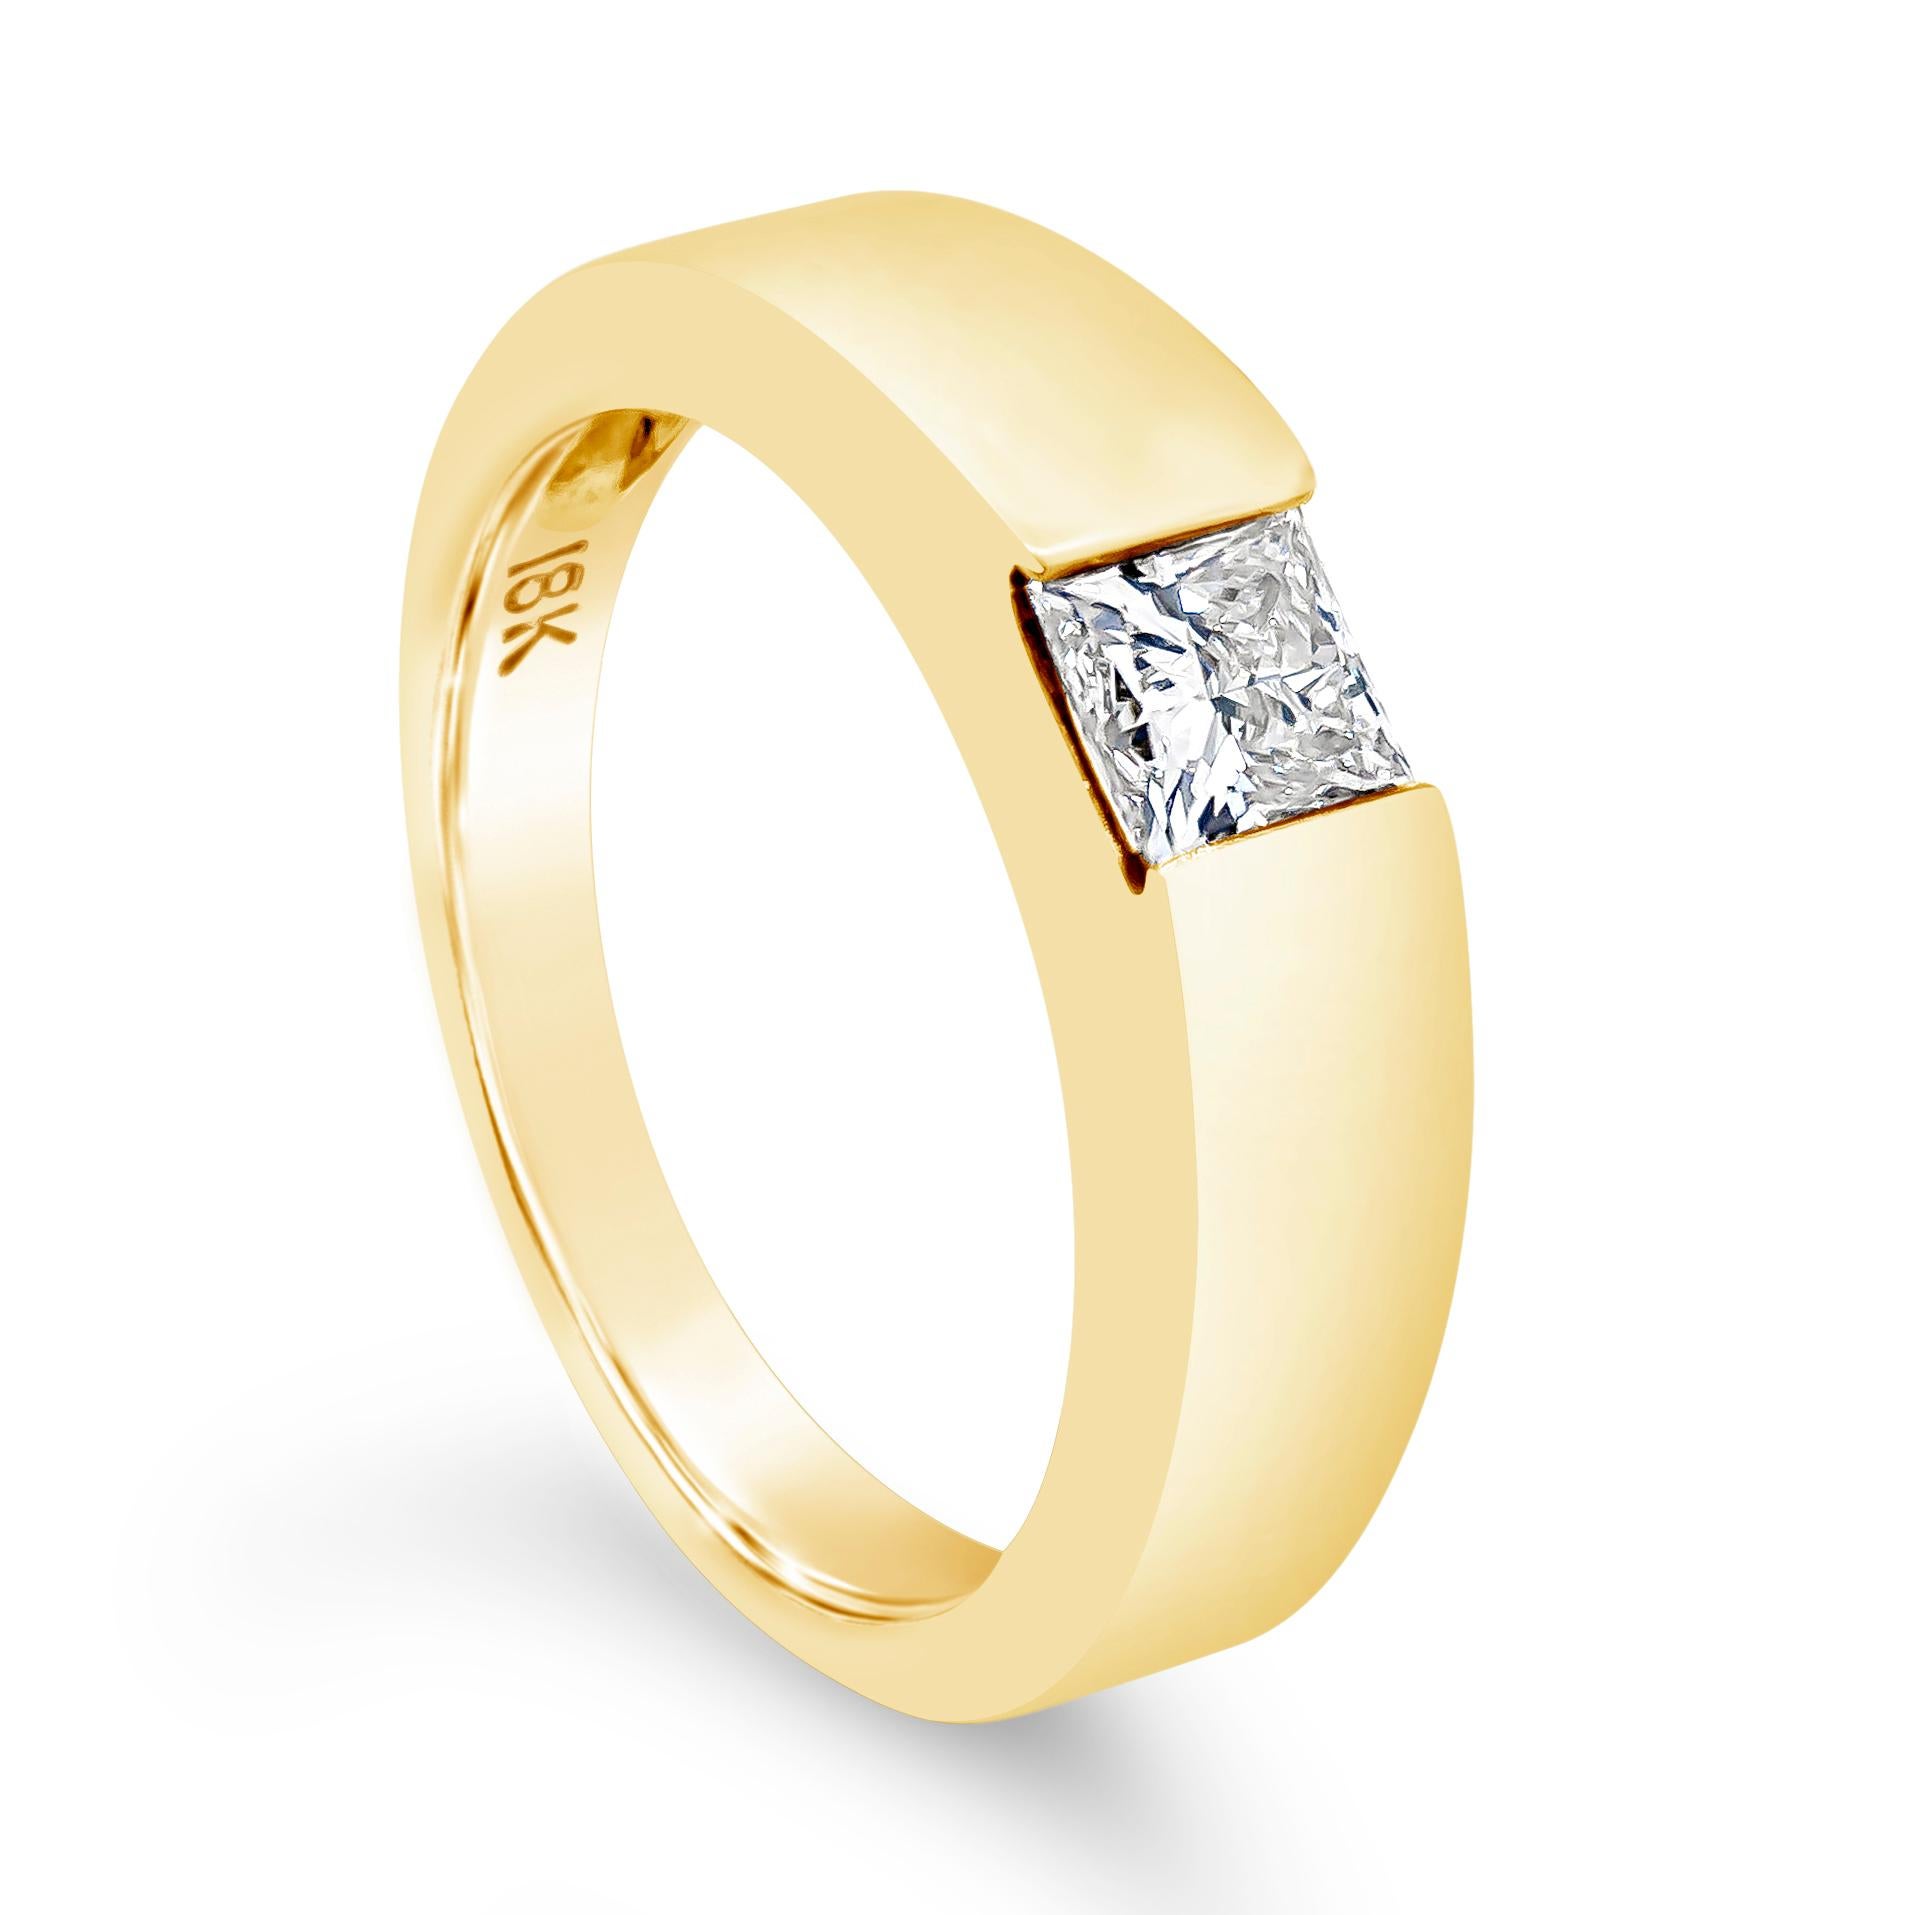 A simple and modern ring style showcasing a solitaire princess cut diamond weighing 0.55 carats, certified by EGL as J color and VVS2 clarity. The band has an angular tapered design, and set in a semi-bezel setting. Made in 18K yellow gold.

Roman